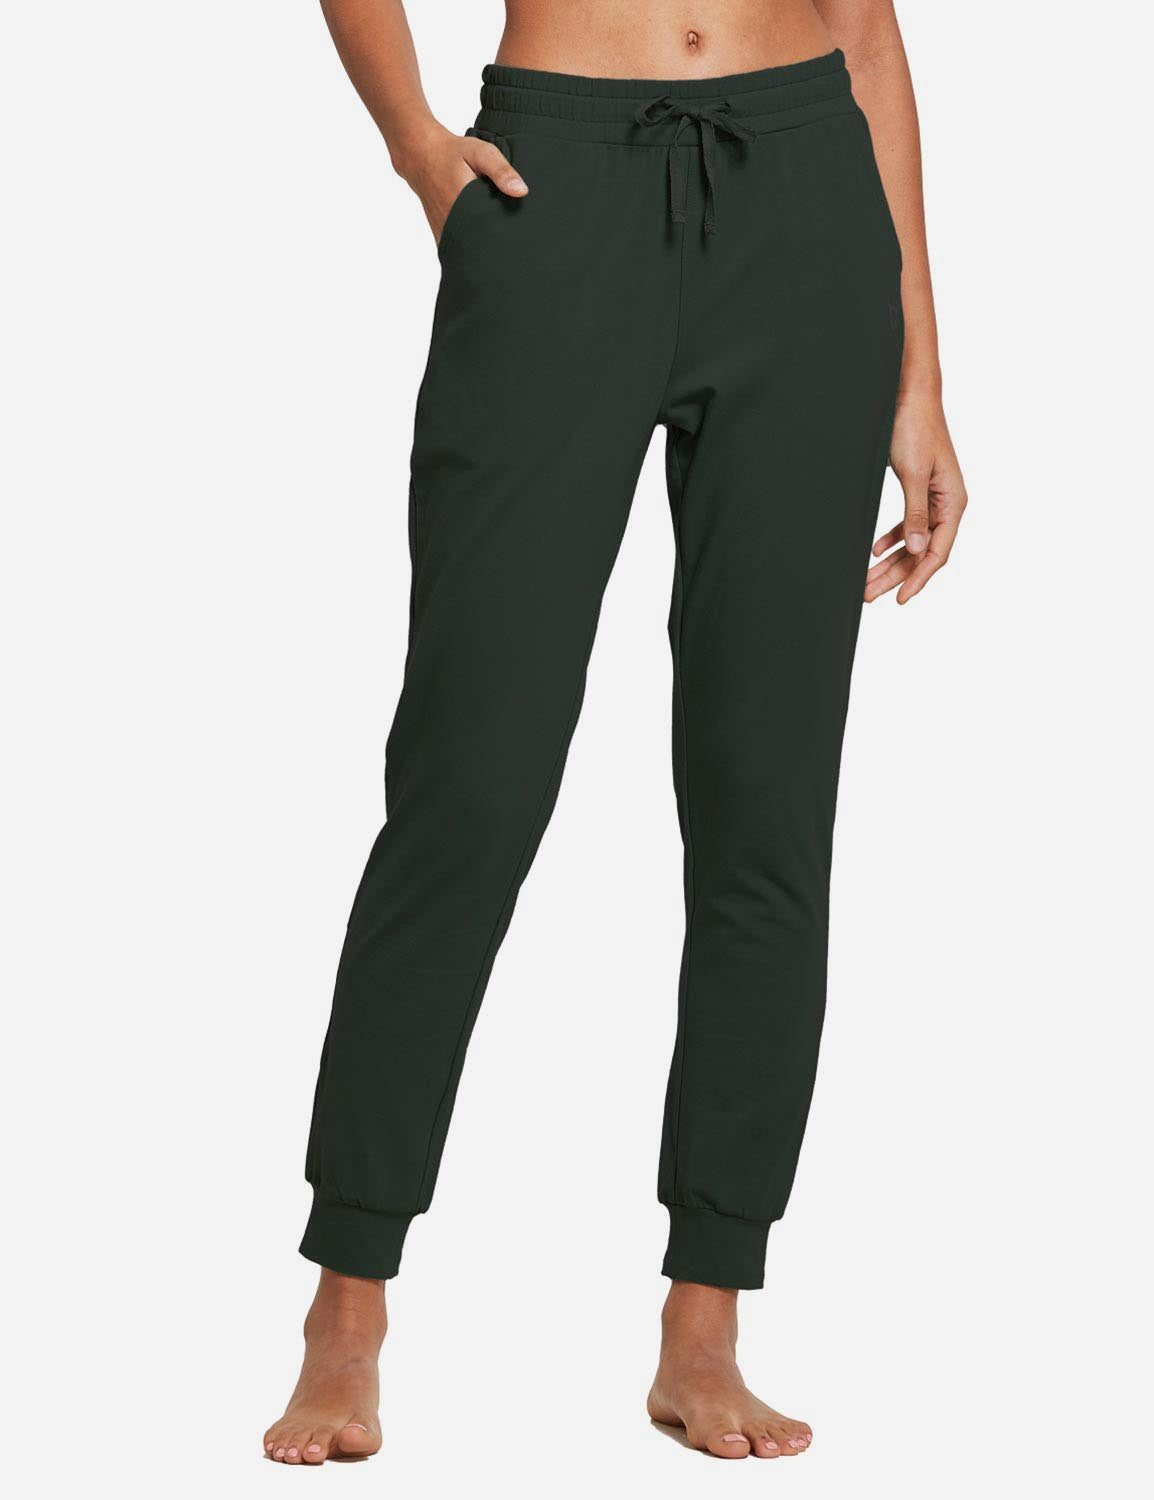 Baleaf Women's Cotton Comfy Pocketed & Tapered Weekend Joggers abh103 Army Green Front